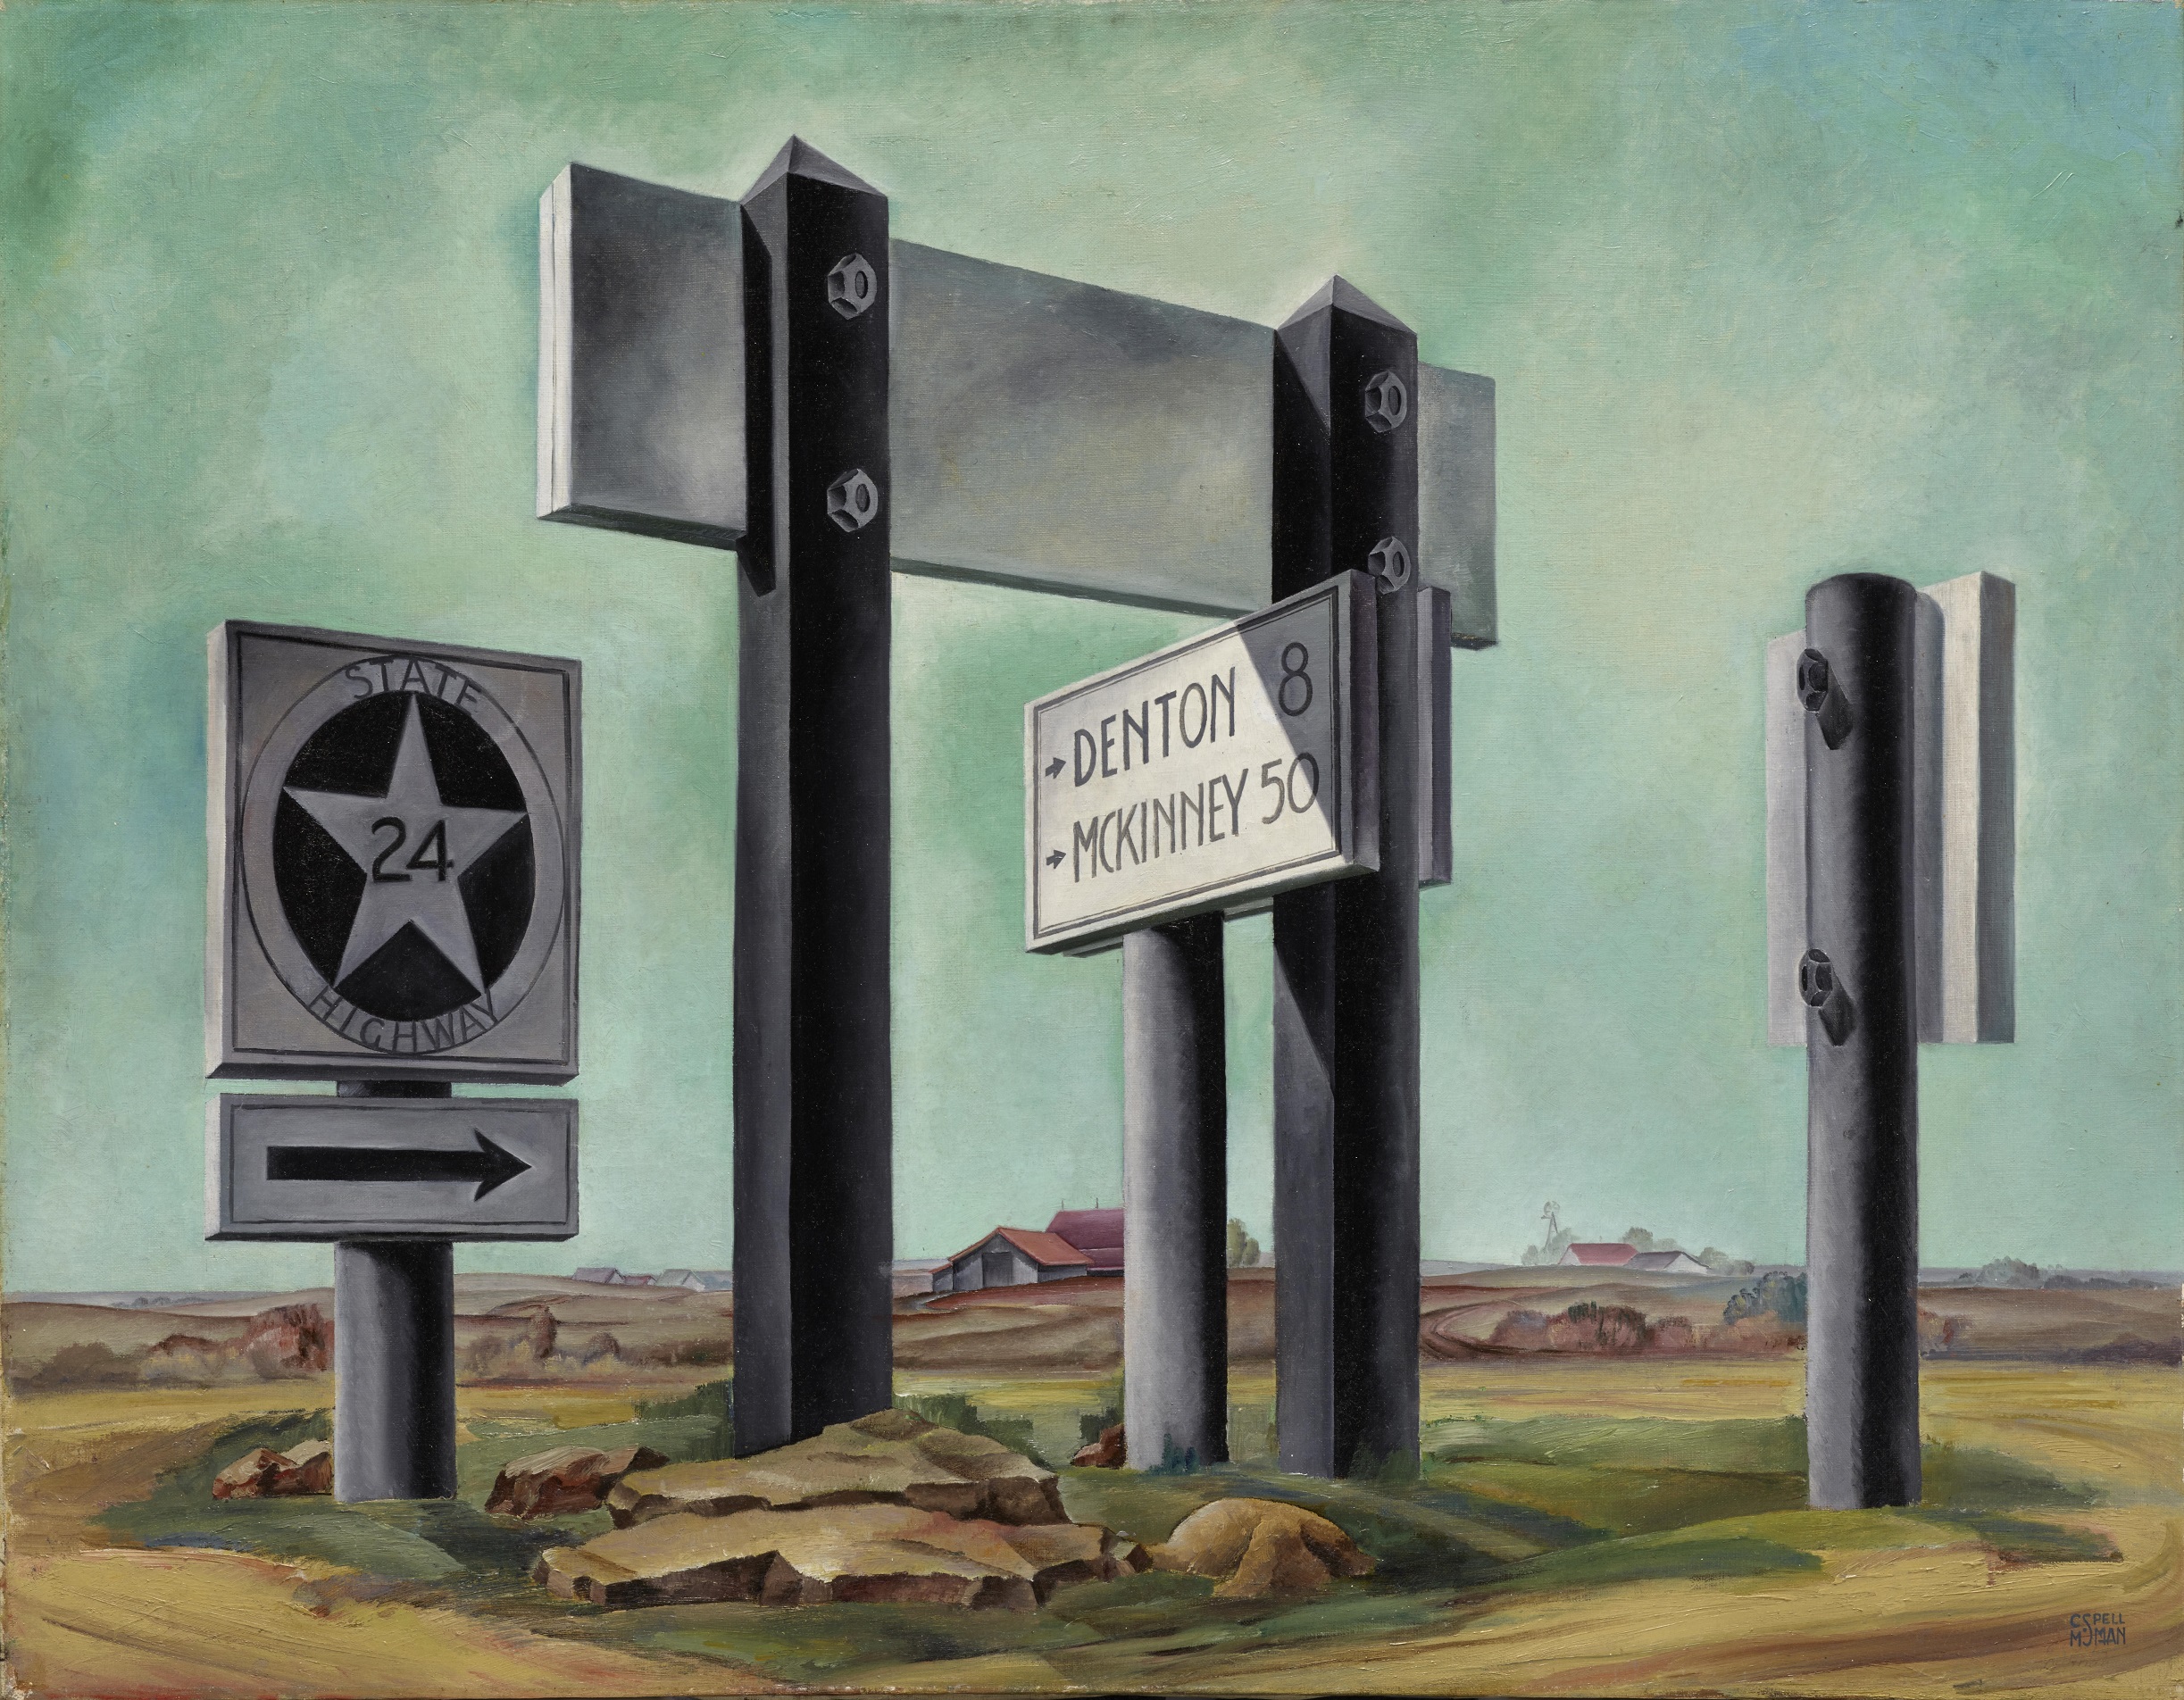 painting of a landscape in the American west with several road signs